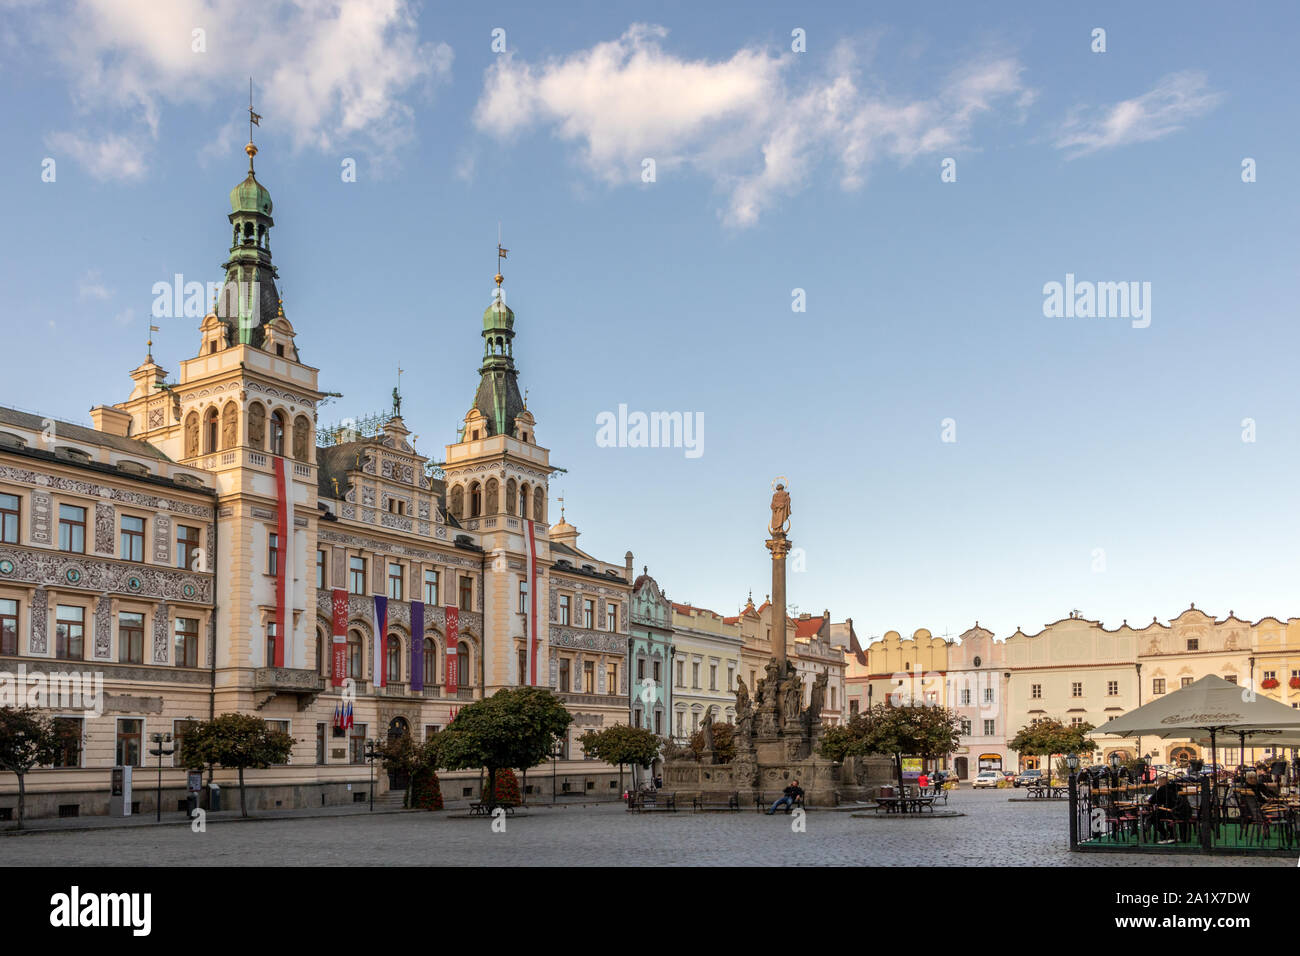 Photo of Pardubice historic Old Town Square in Czech Republic Stock Photo